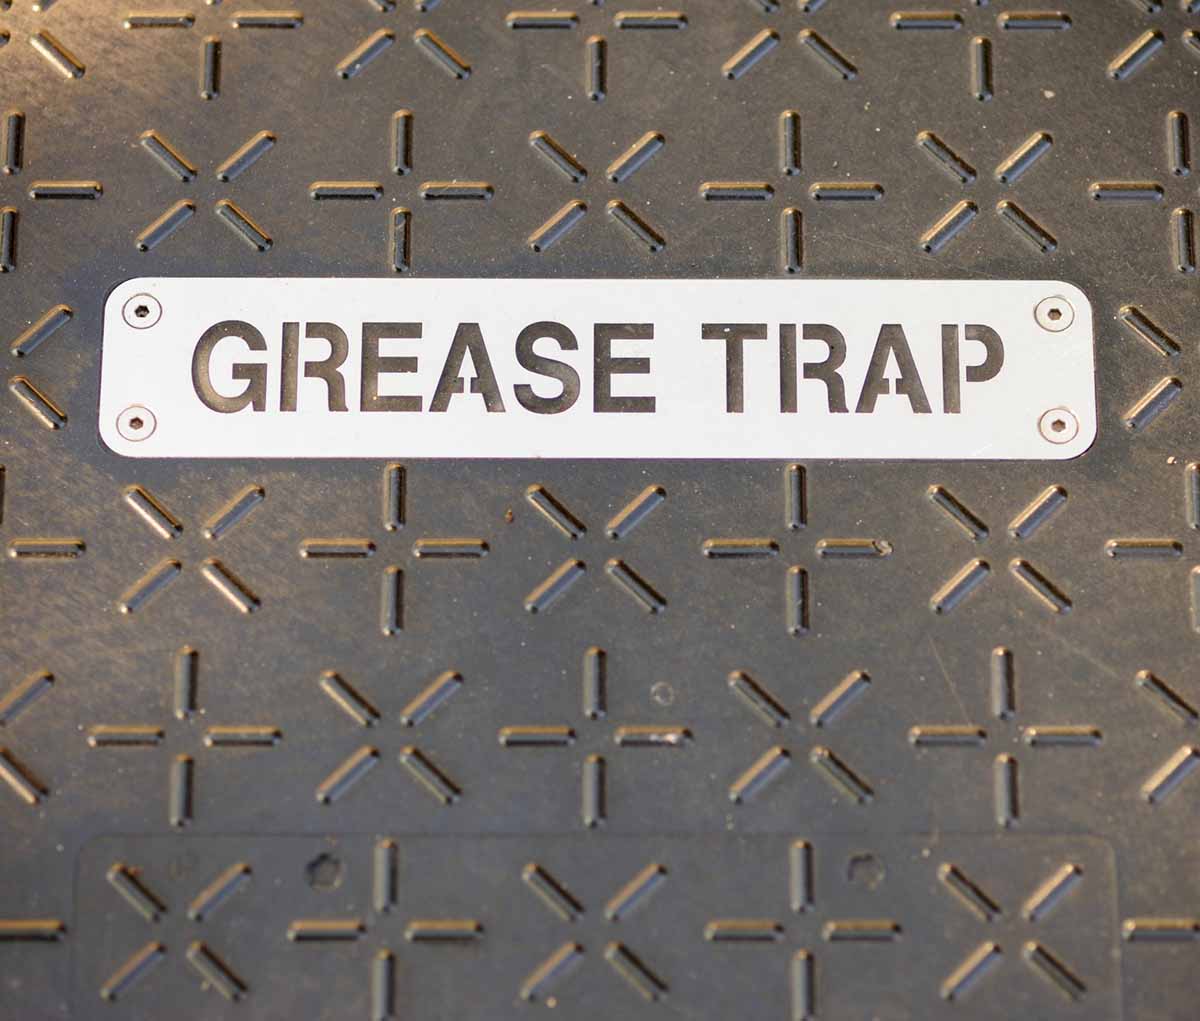 Grease Trap Cleaning – Grease Trap Maintenance